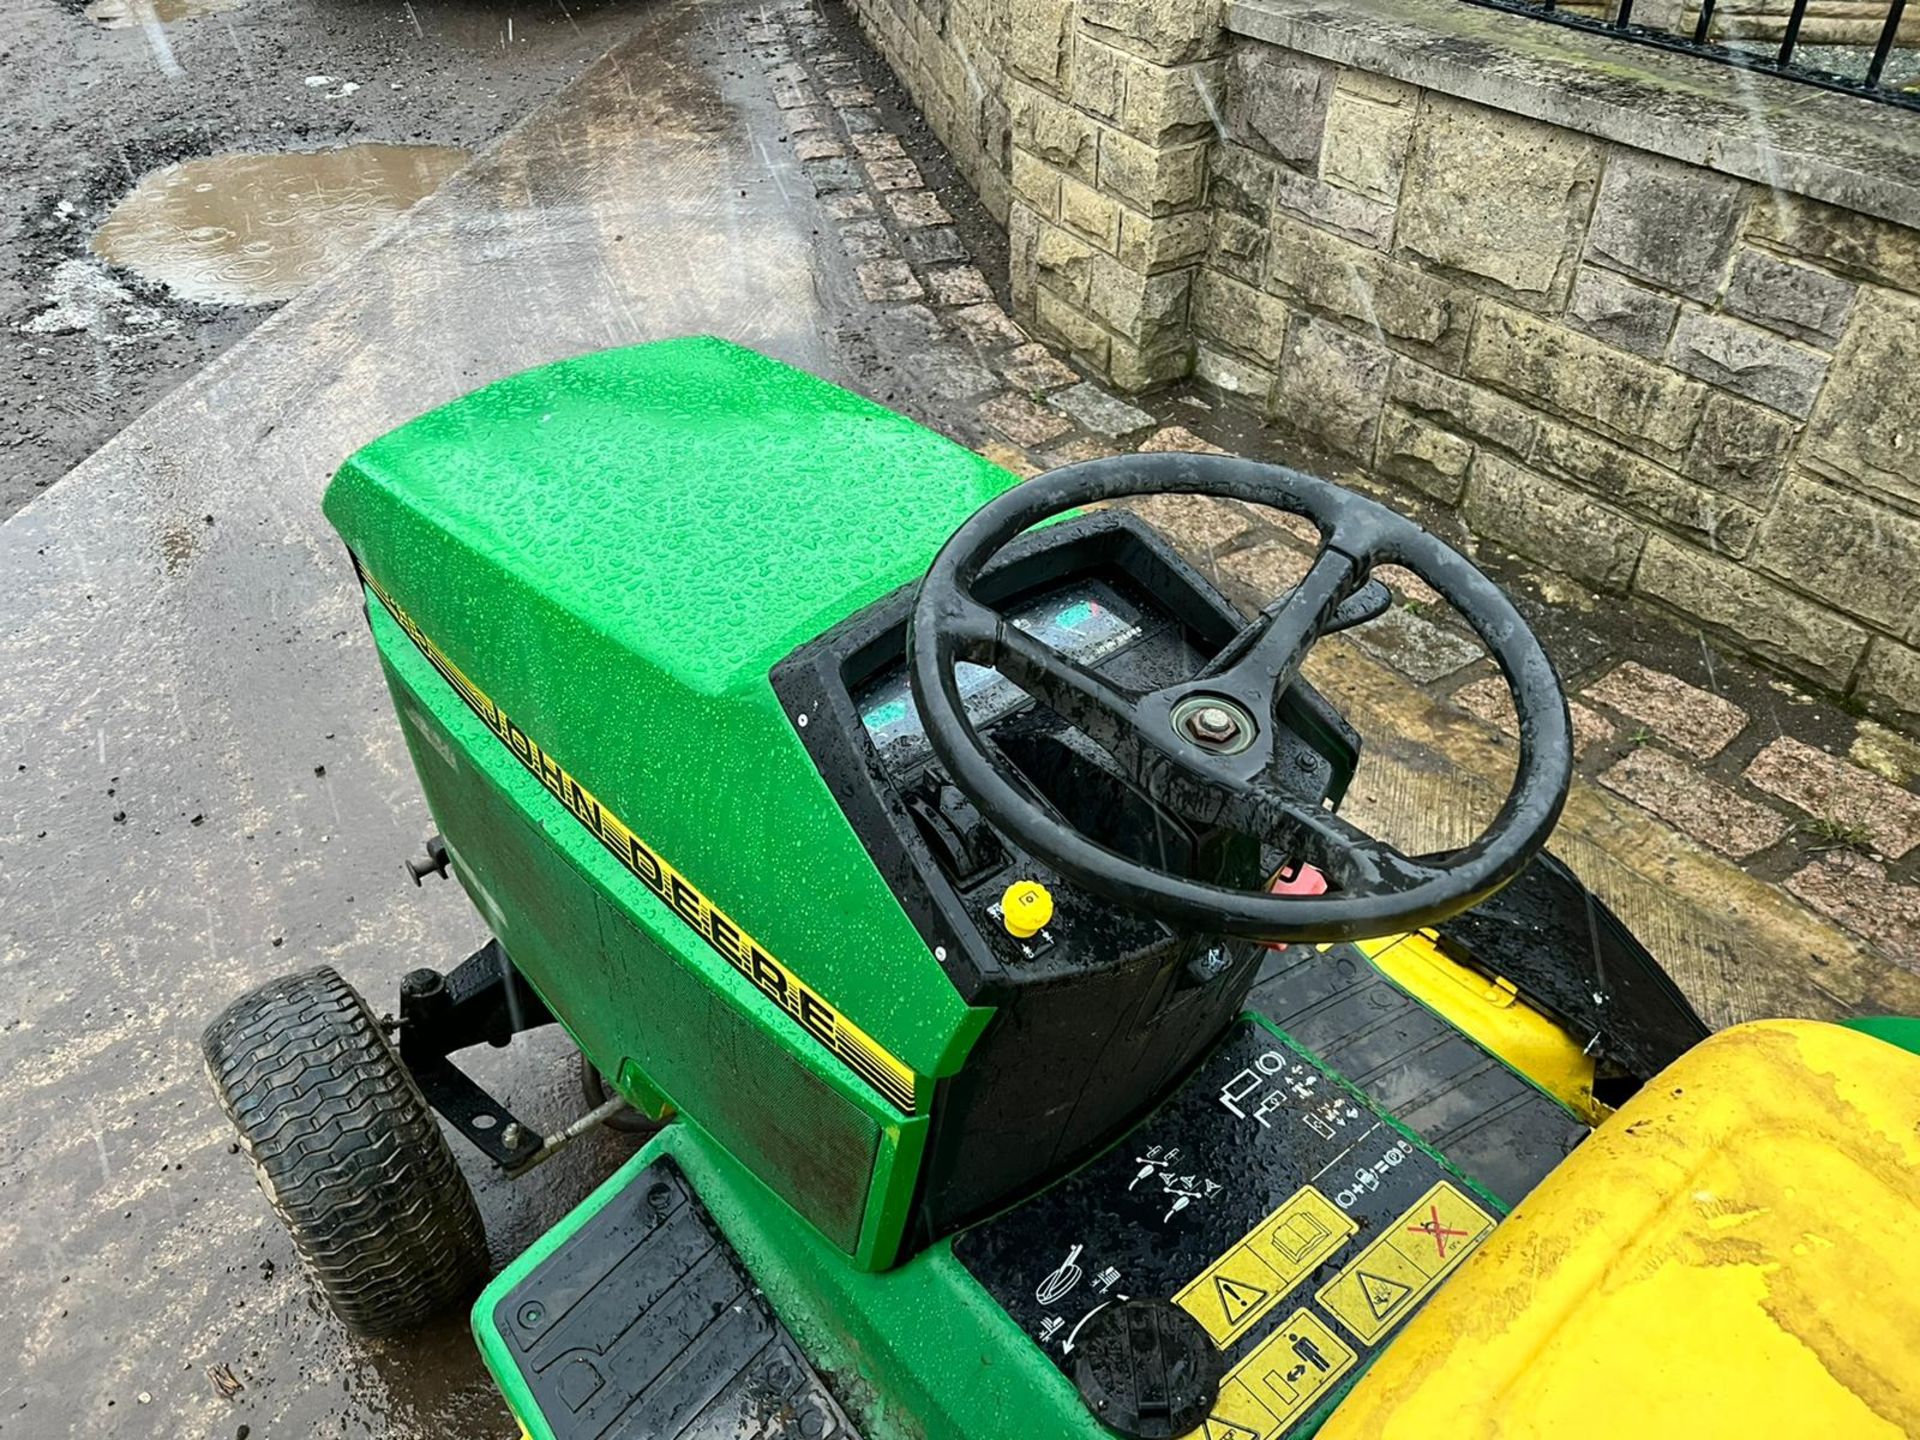 JOHN DEERE 415 COMPACT TRACTOR / RIDE ON MOWER, RUNS DRIVES AND CUTS, 1129 HOURS *PLUS VAT* - Image 7 of 8